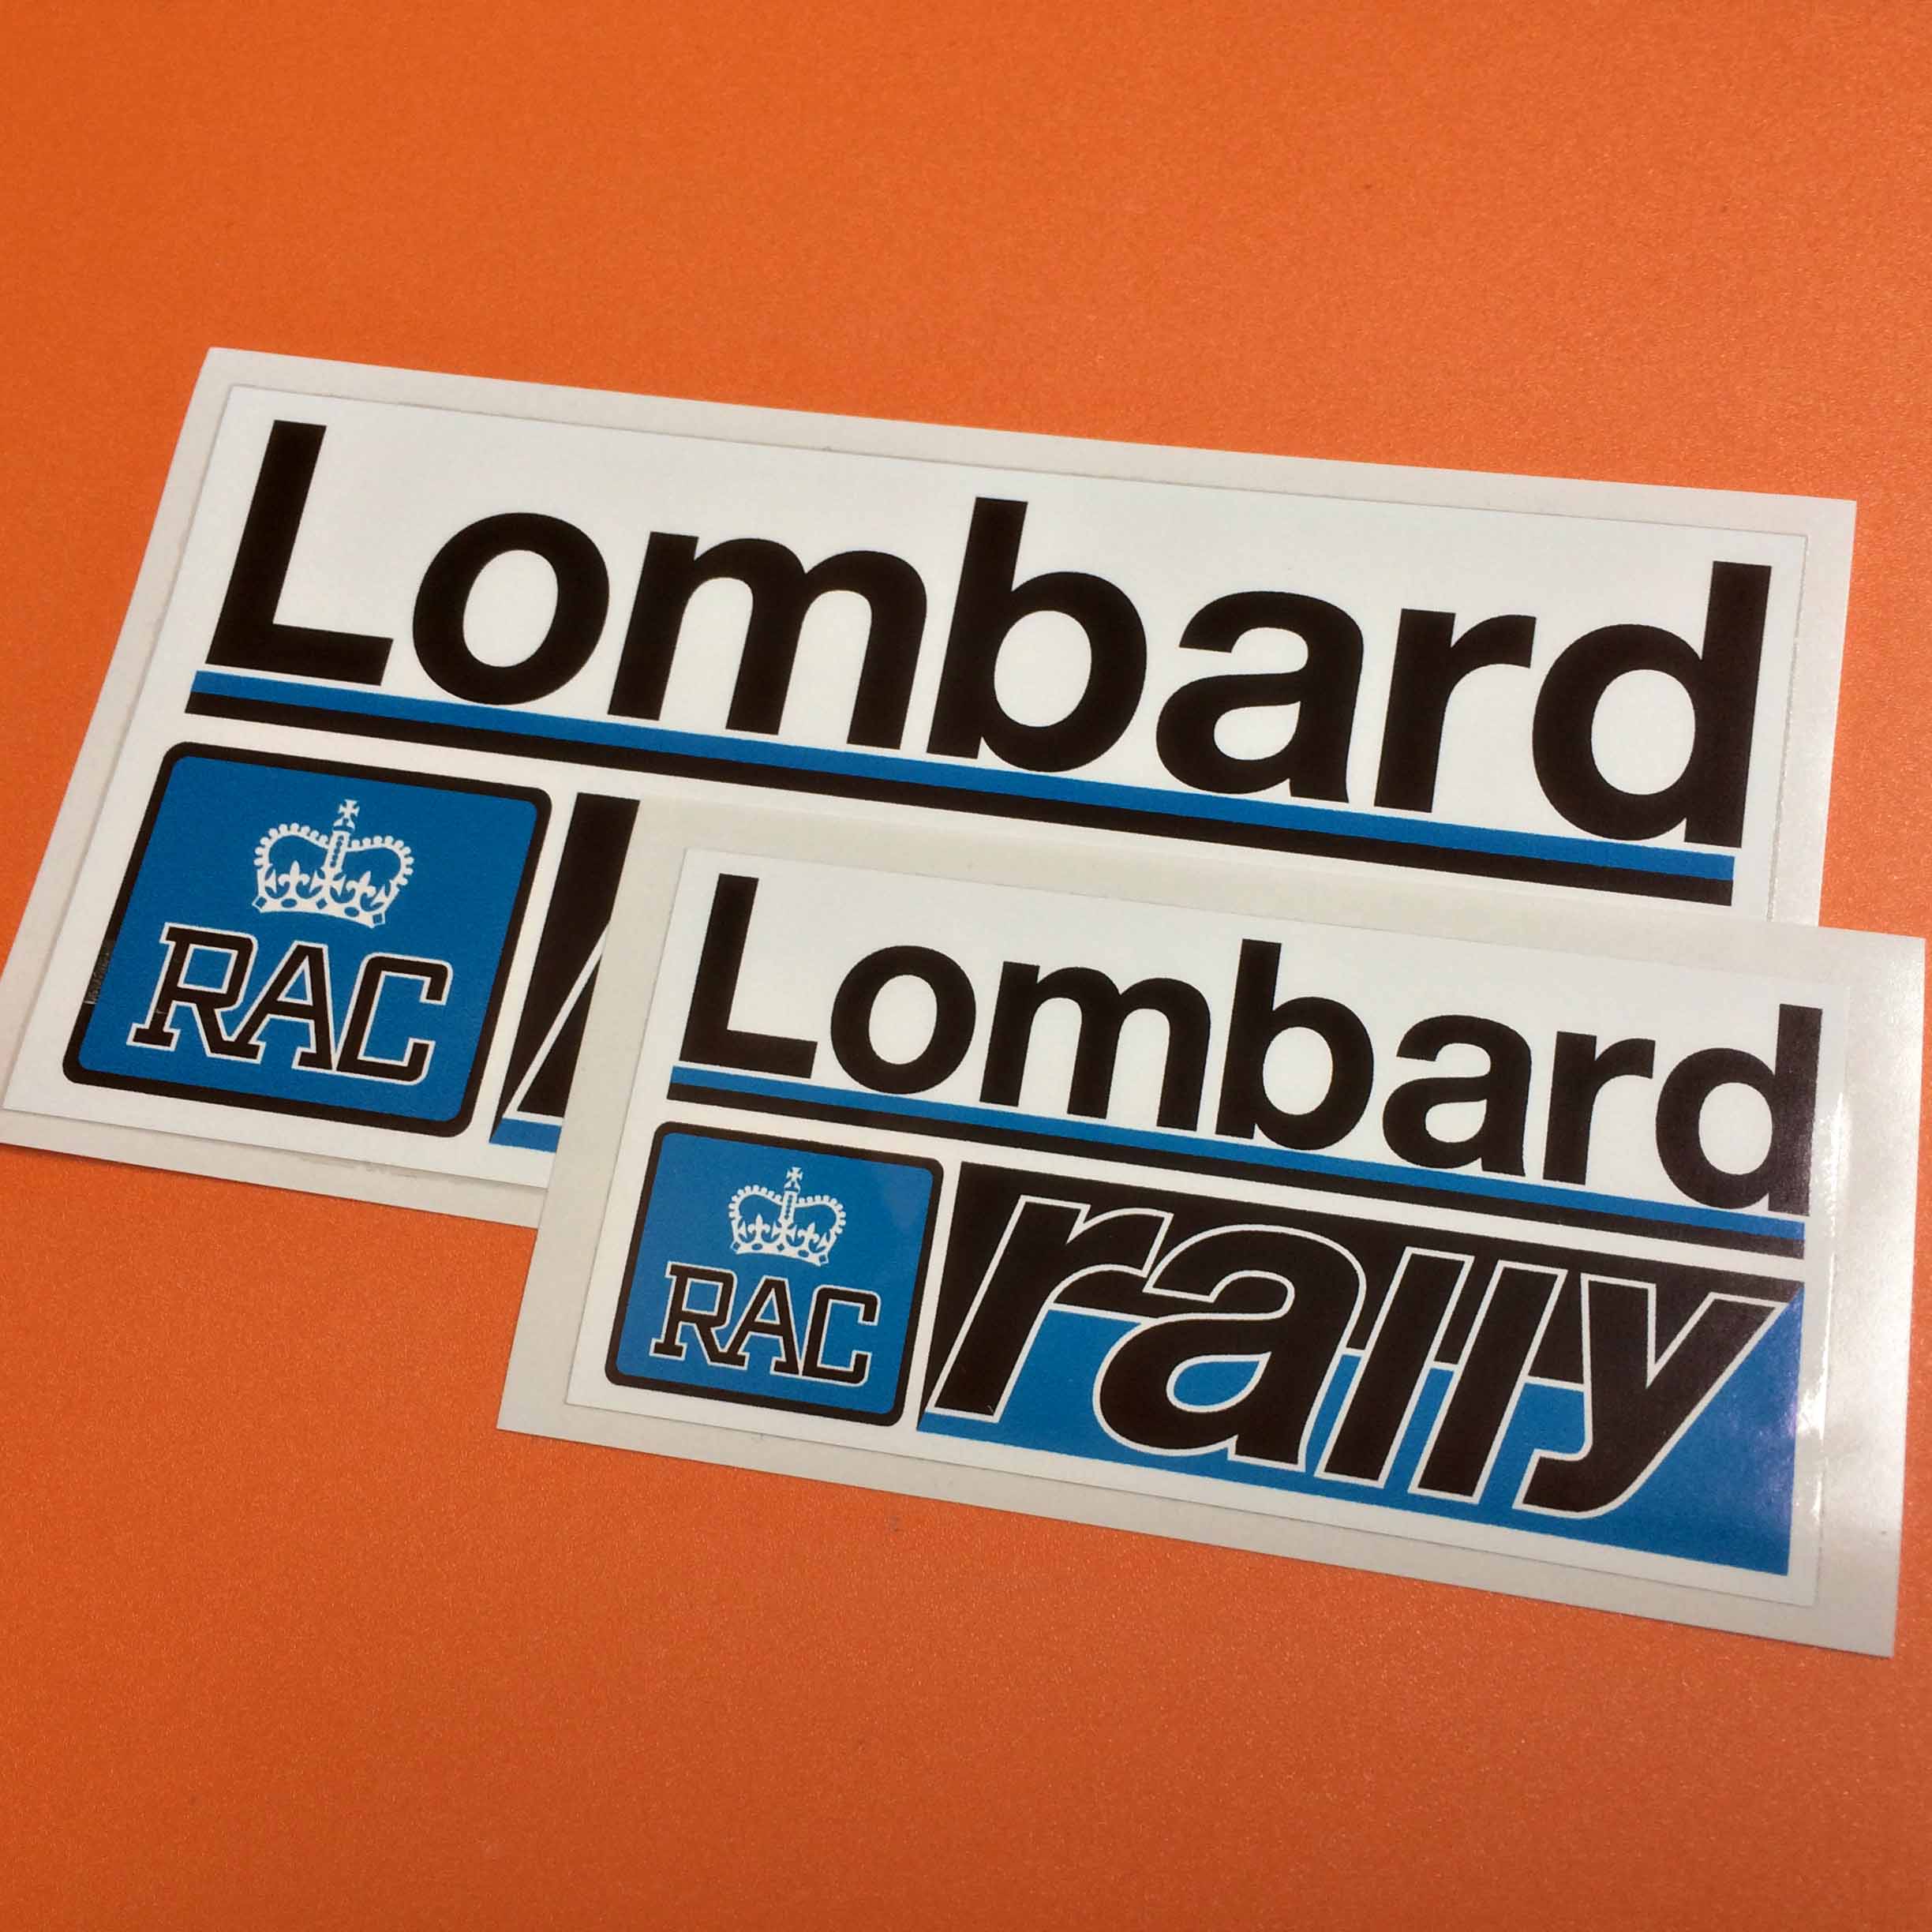 Lombard in bold lettering. Rally below right on a rectangular background in two colours. Left of this RAC and a crown encased in a square.